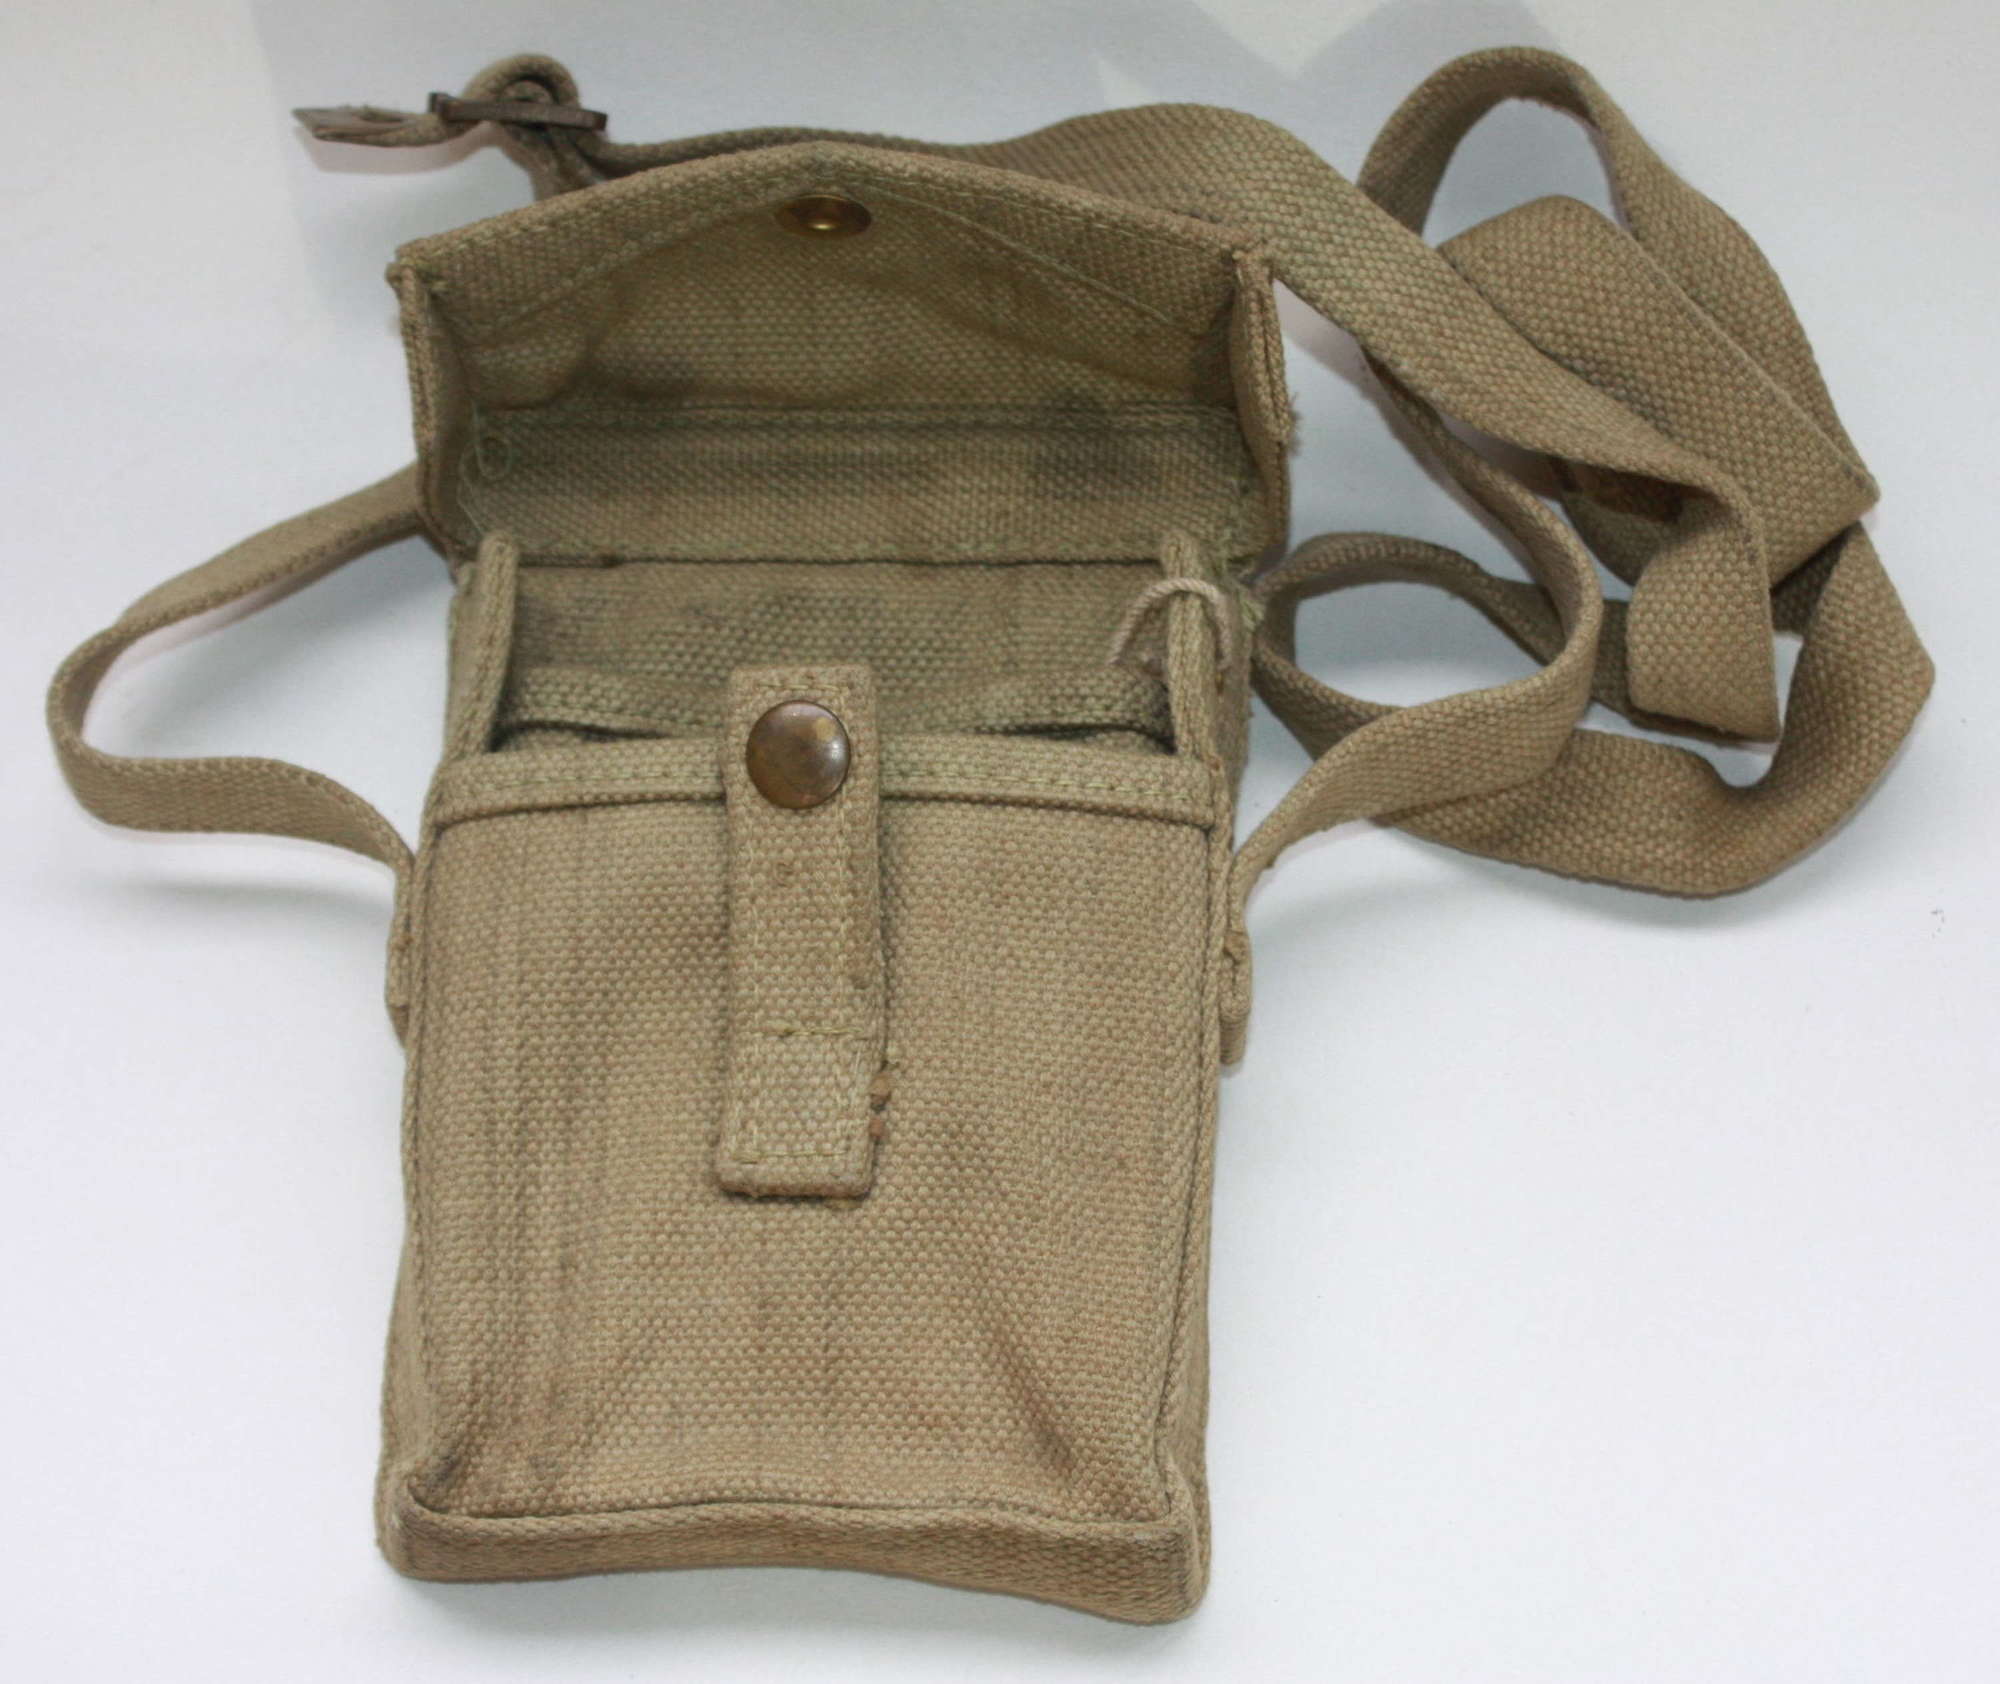 A WWII OFFICERS WASH KIT HOLDER